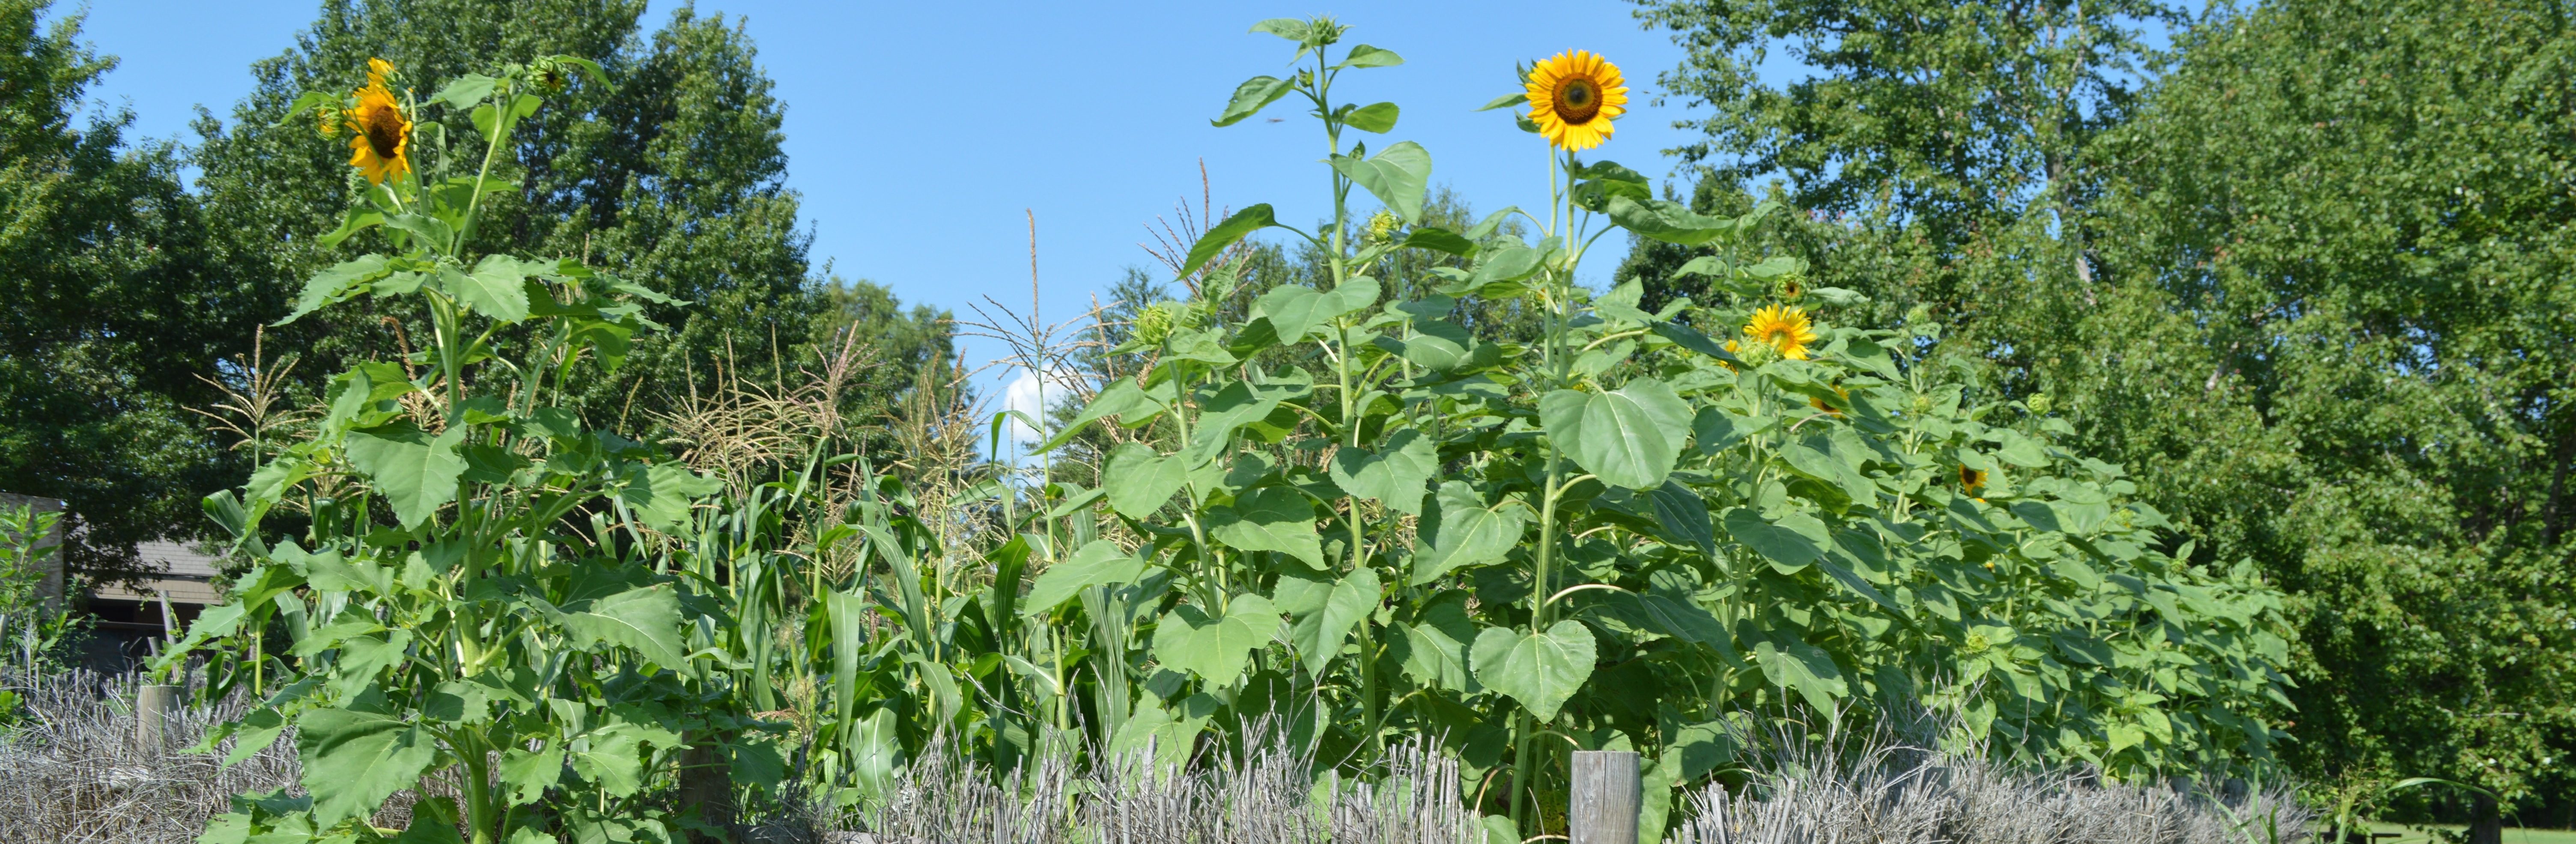 Sunflowers at the Mississippian Garden at Parkin Archeological State Park. Photograph by Jodi A. Barnes 2016.